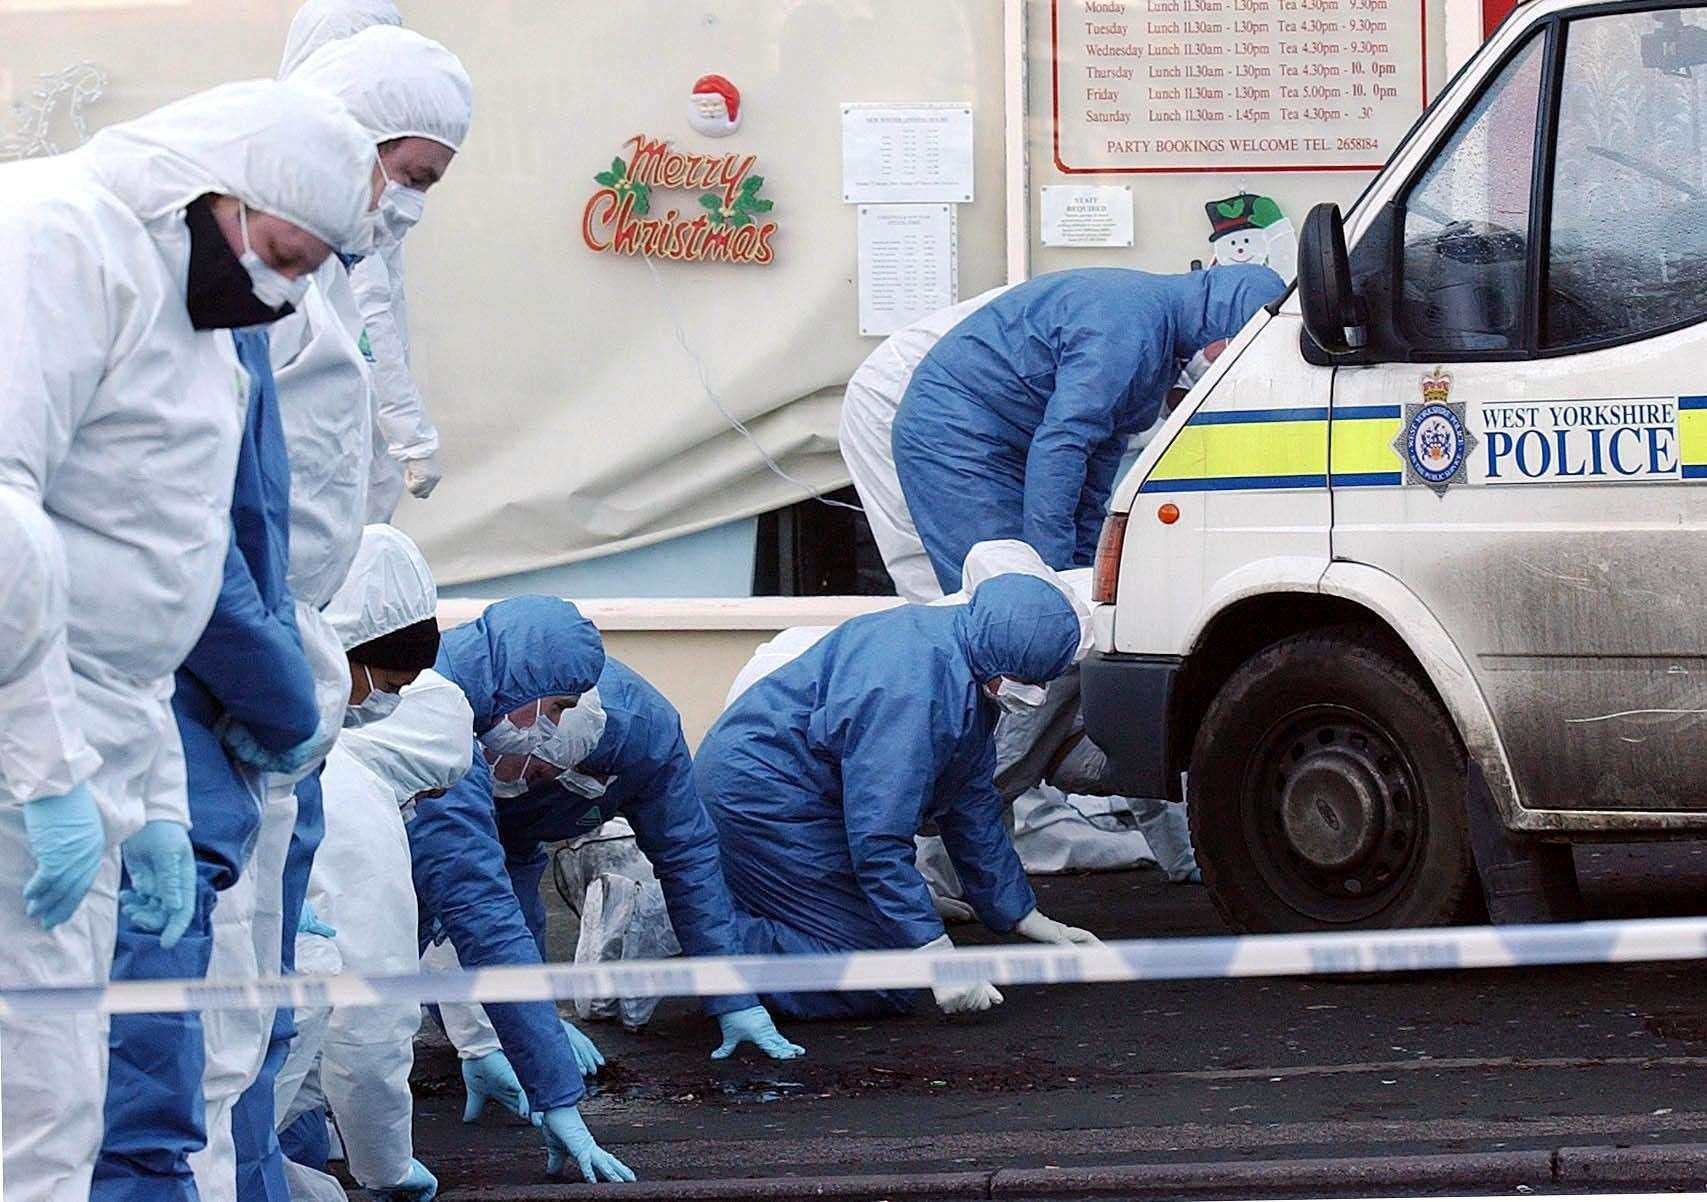 Forensic officers search the scene after the 2003 murder in Dib Lane, Leeds (John Giles/Archive/PA)